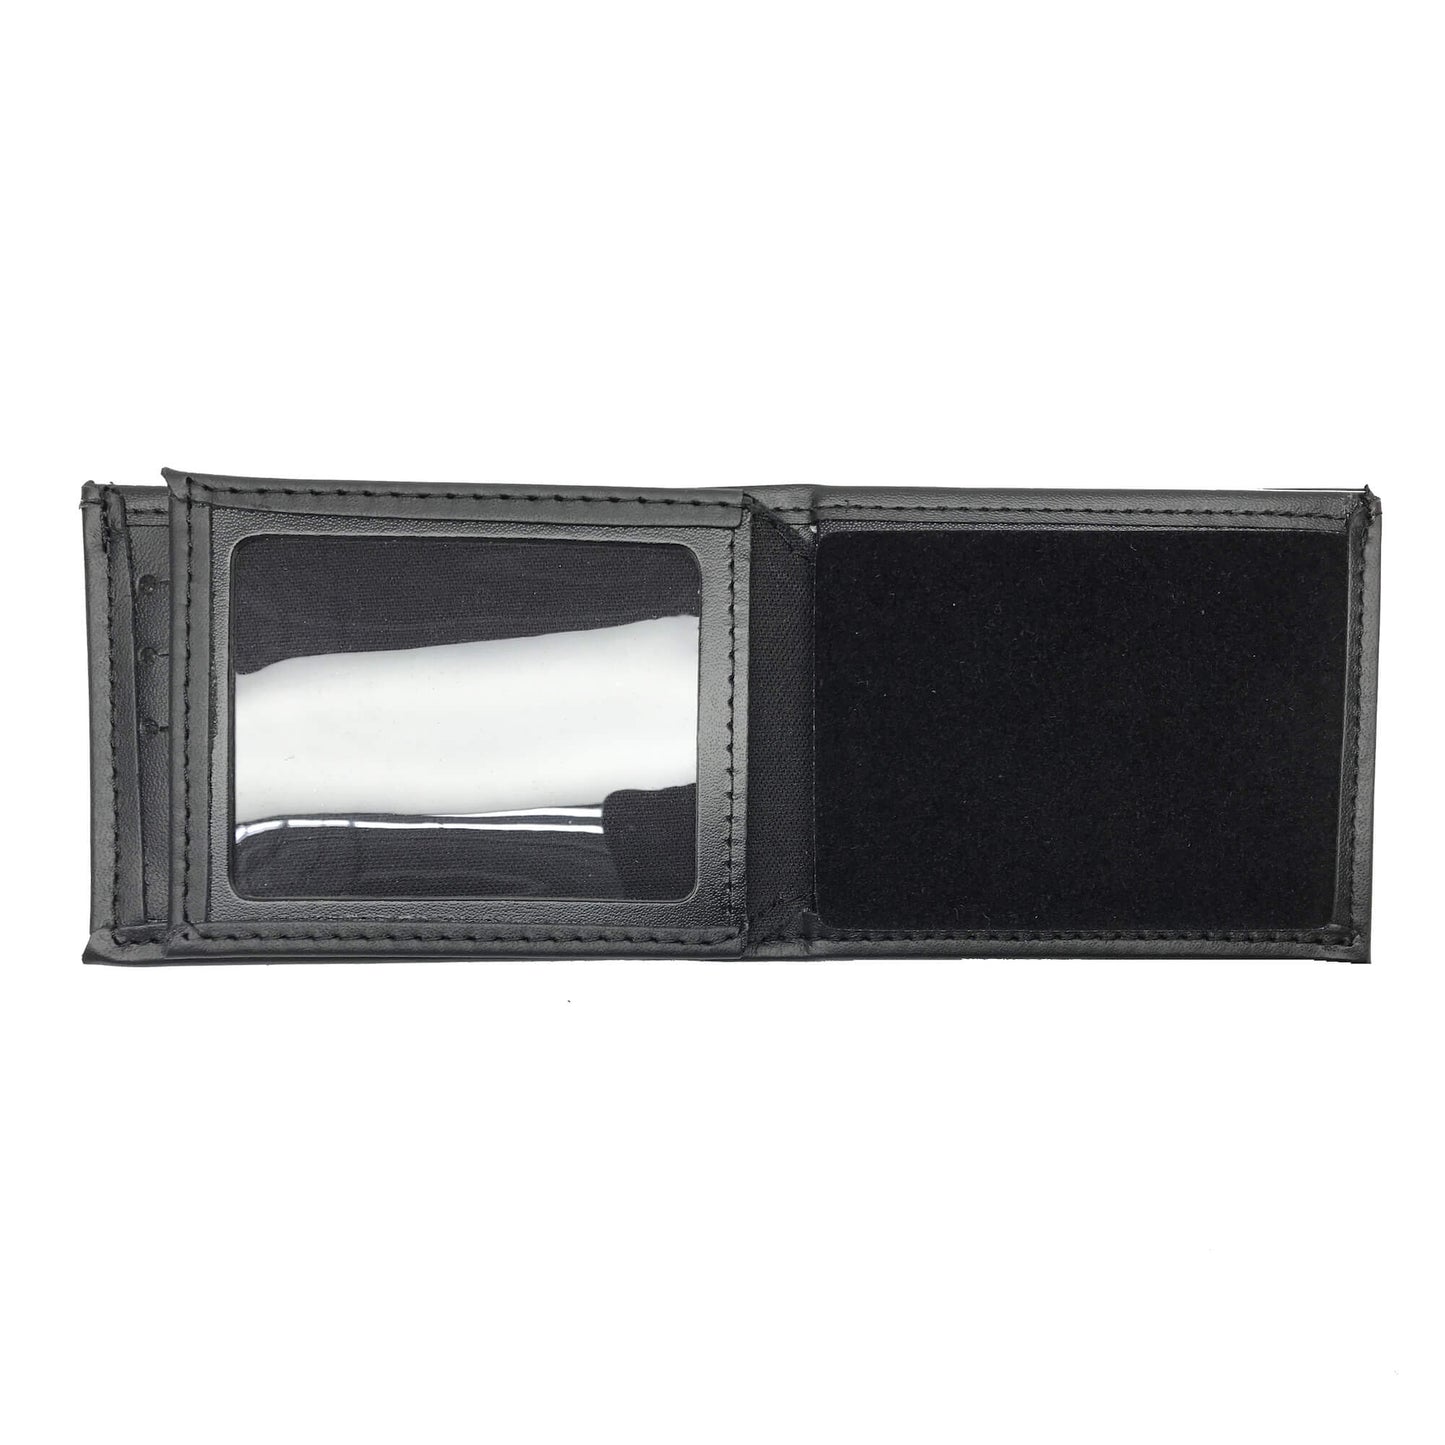 U.S. Federal Air Marshal (3in) Horizontal Bifold Hidden Badge Wallet-Perfect Fit-911 Duty Gear USA